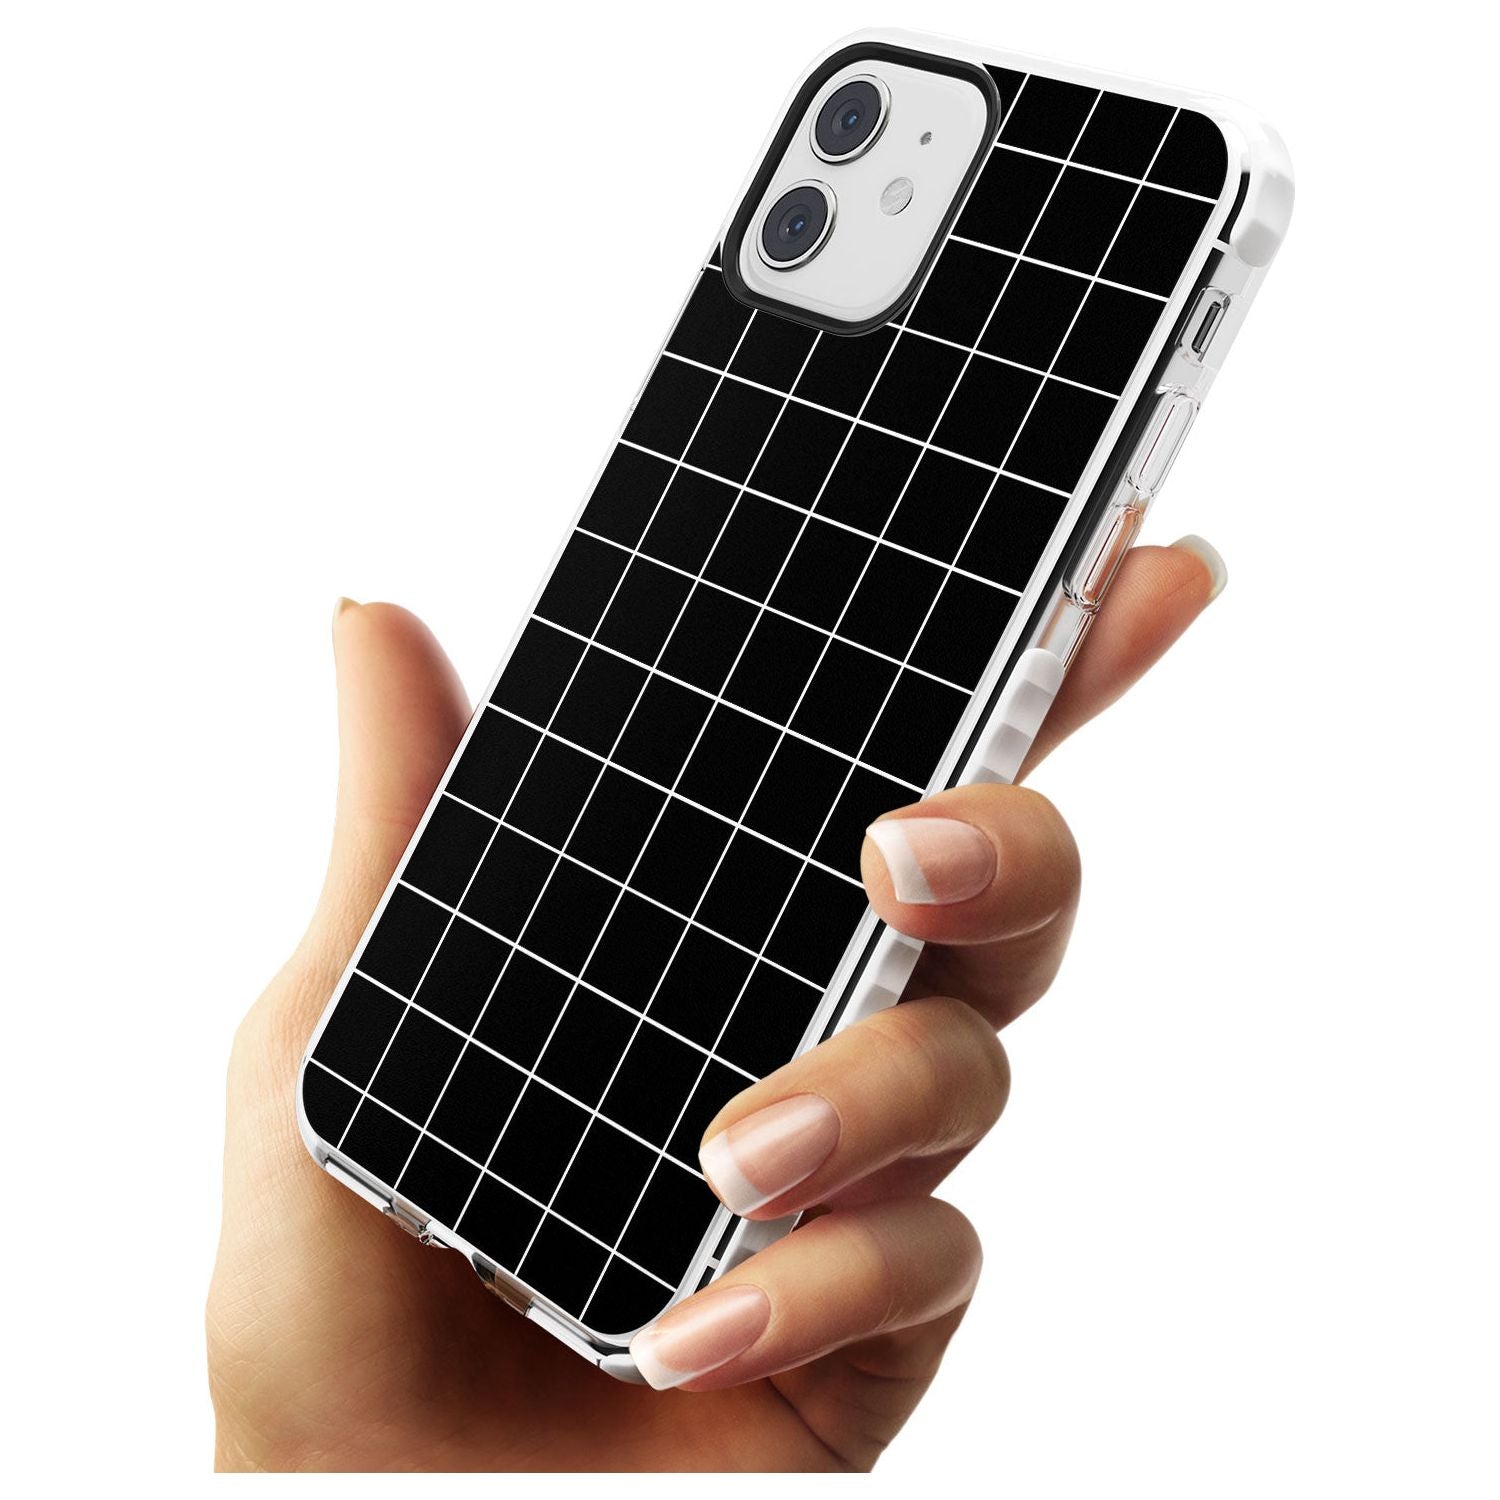 Simplistic Large Grid Pattern Black Impact Phone Case for iPhone 11